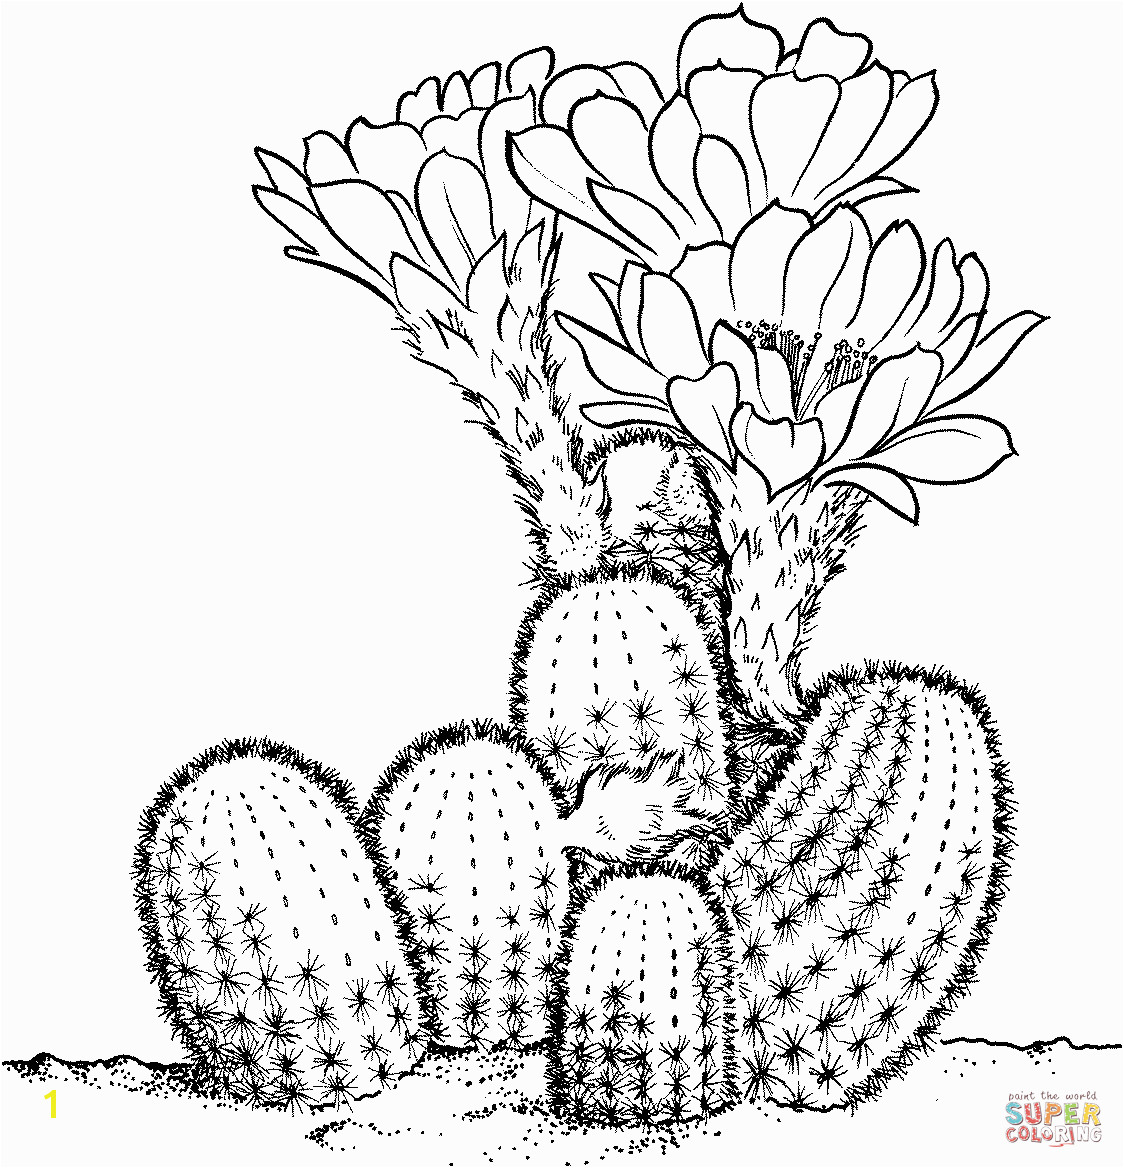 Free Cactus Coloring Pages Prickly Pear Cactus Coloring Page